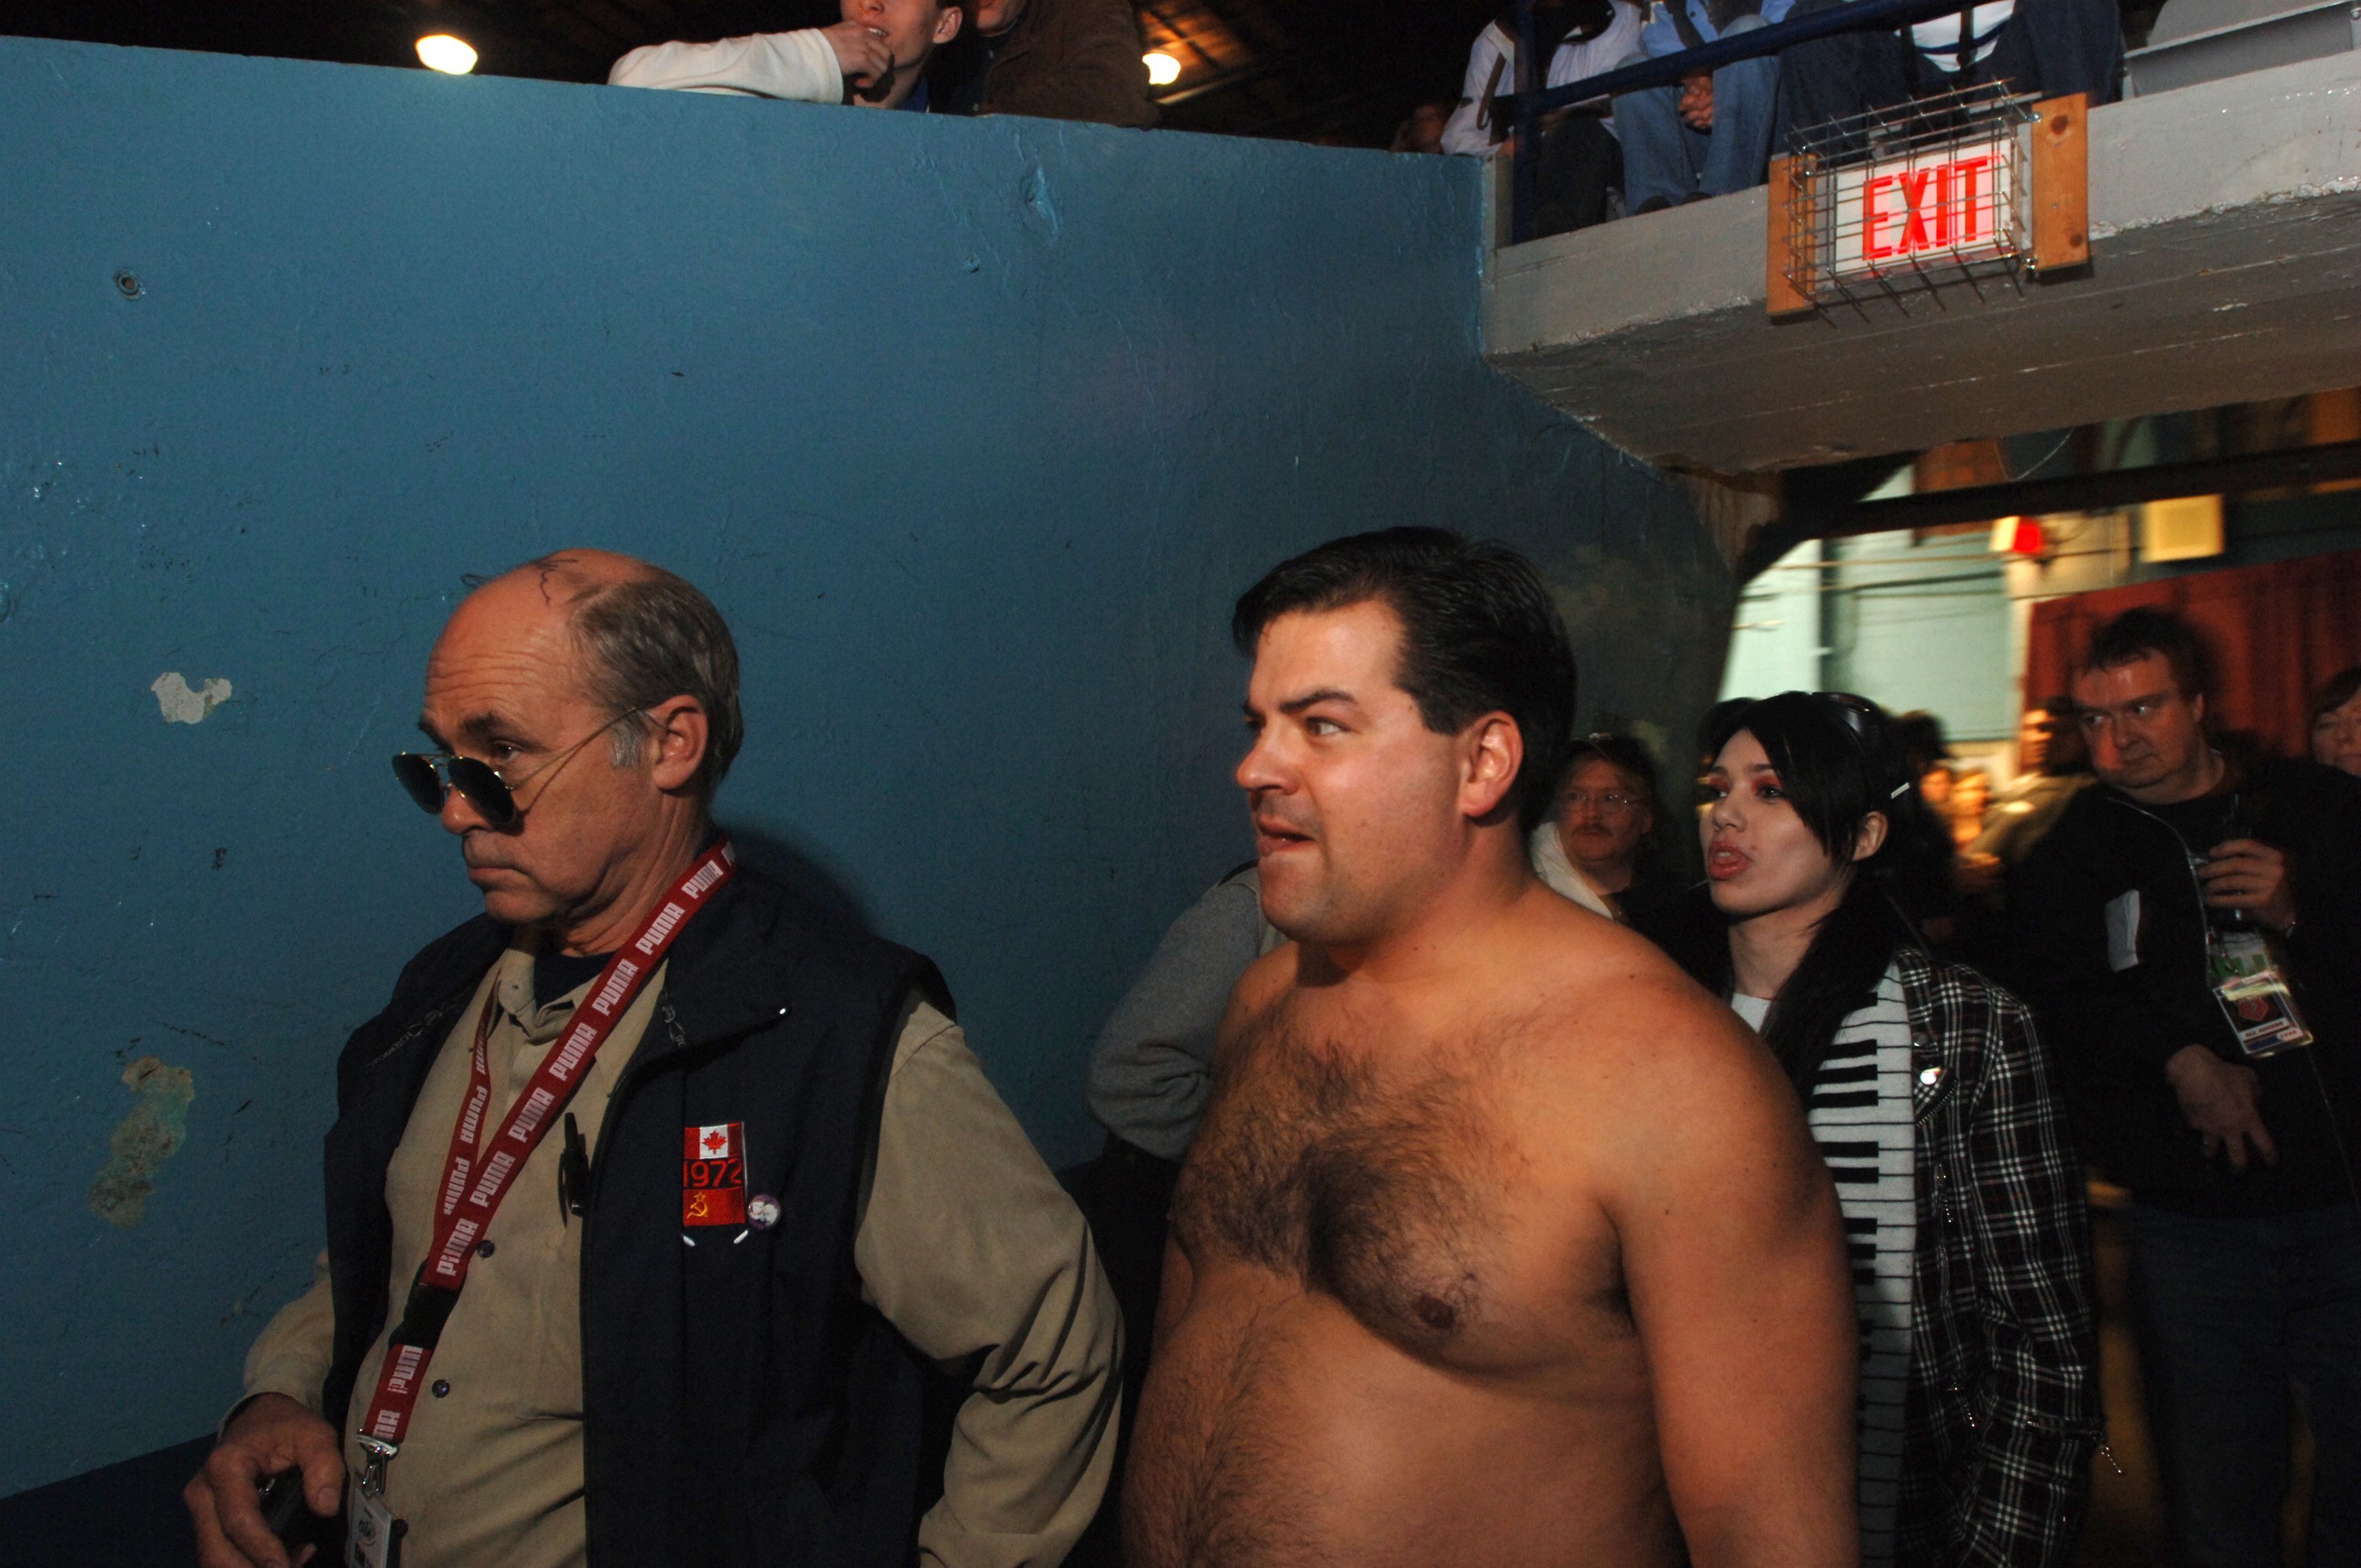 John Dunsworth and Patrick Roach walk down a hall dressed as their characters from 'Trailer Park Boys'